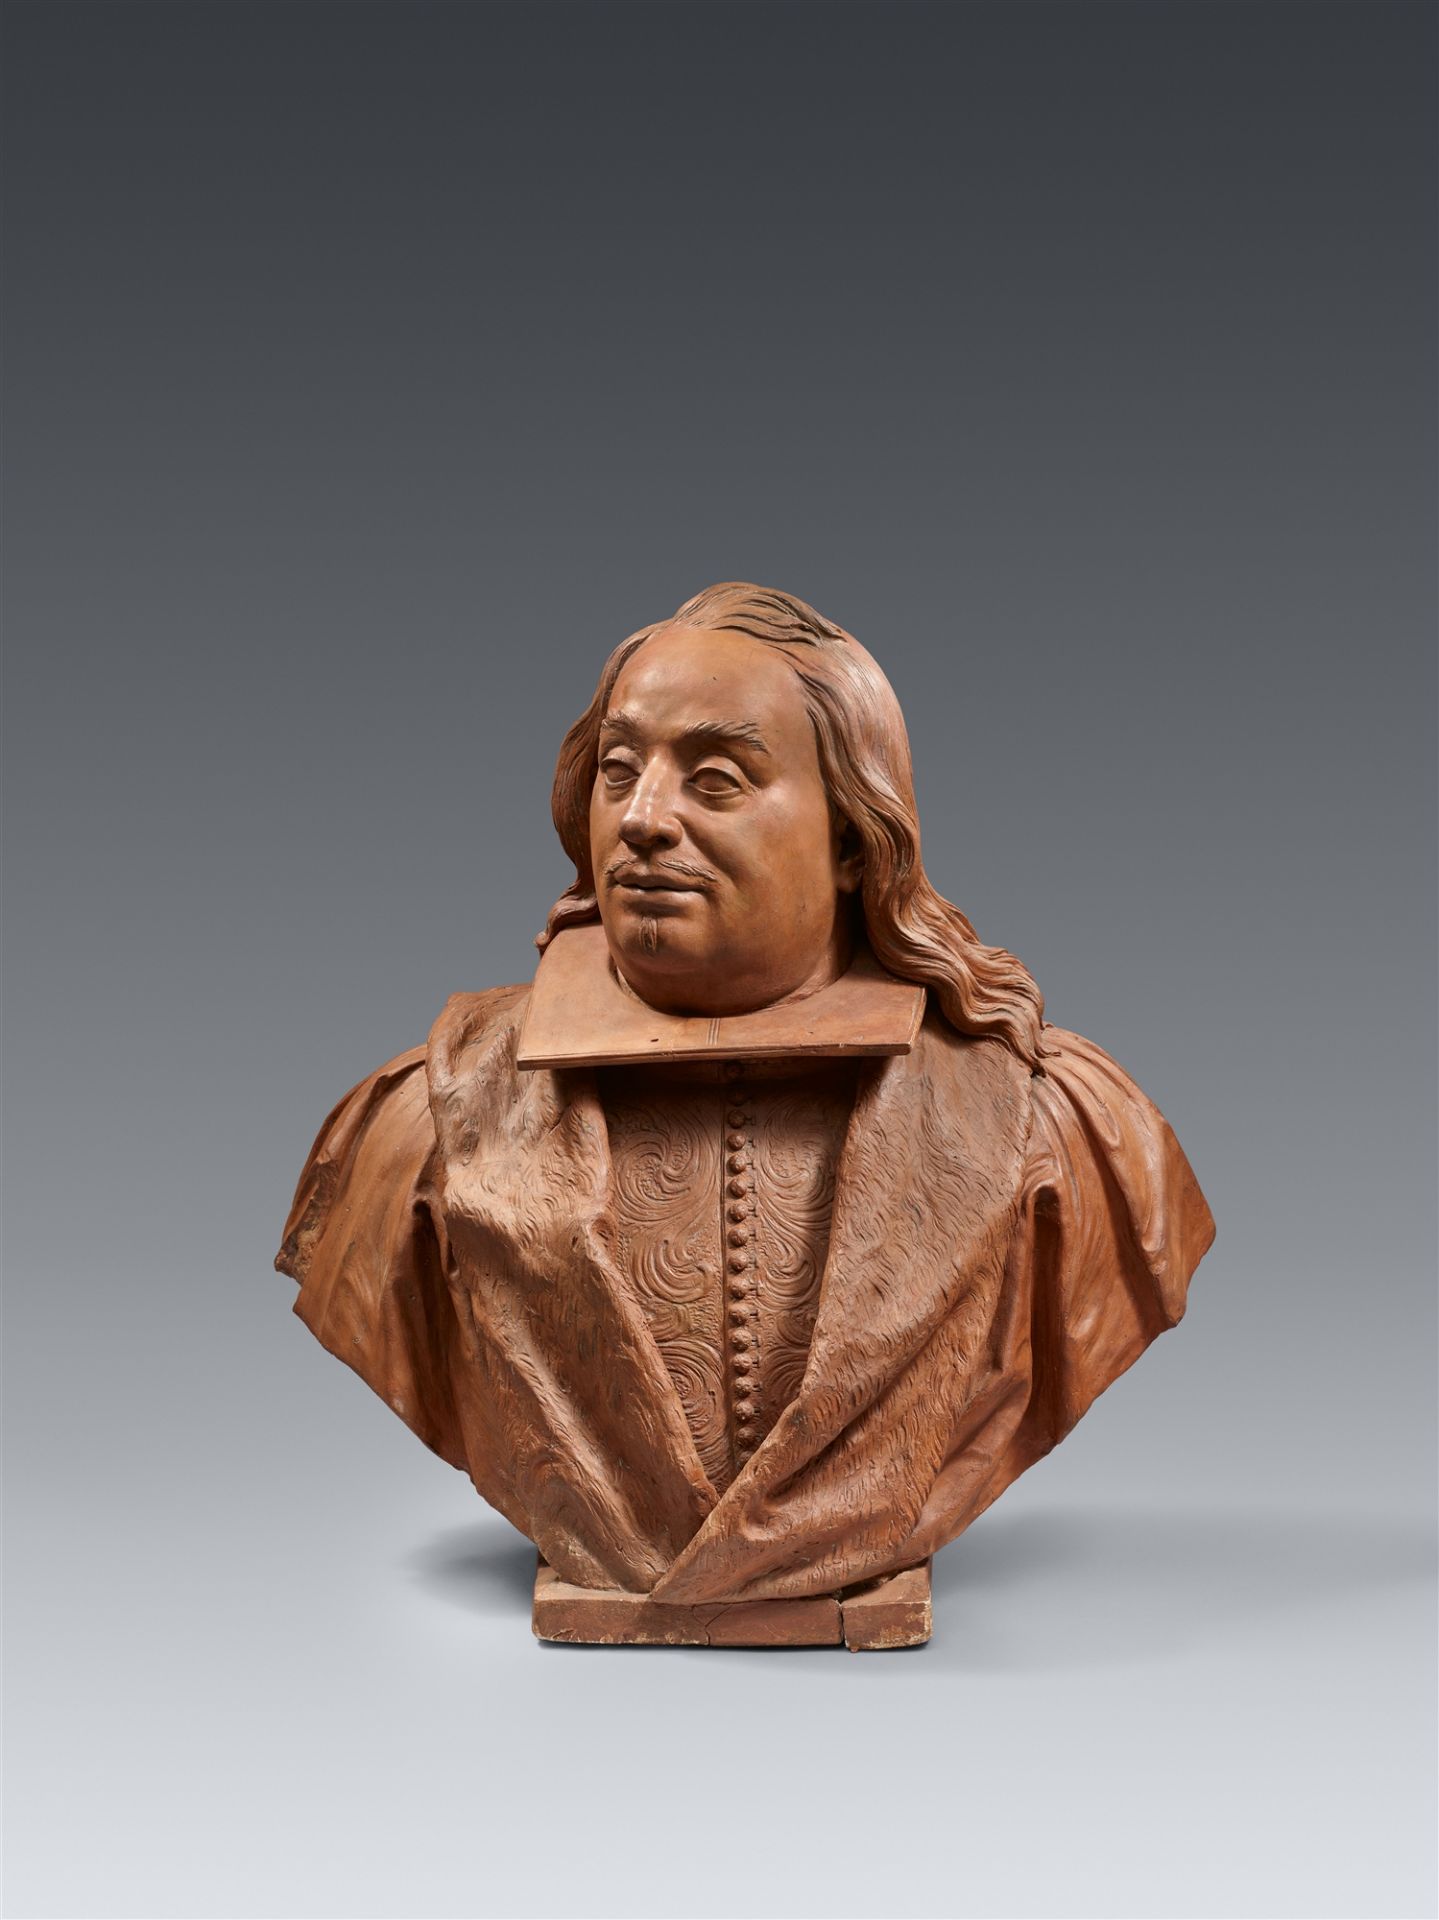 A terracotta bust of a man, attributed to Rombout Verhulst